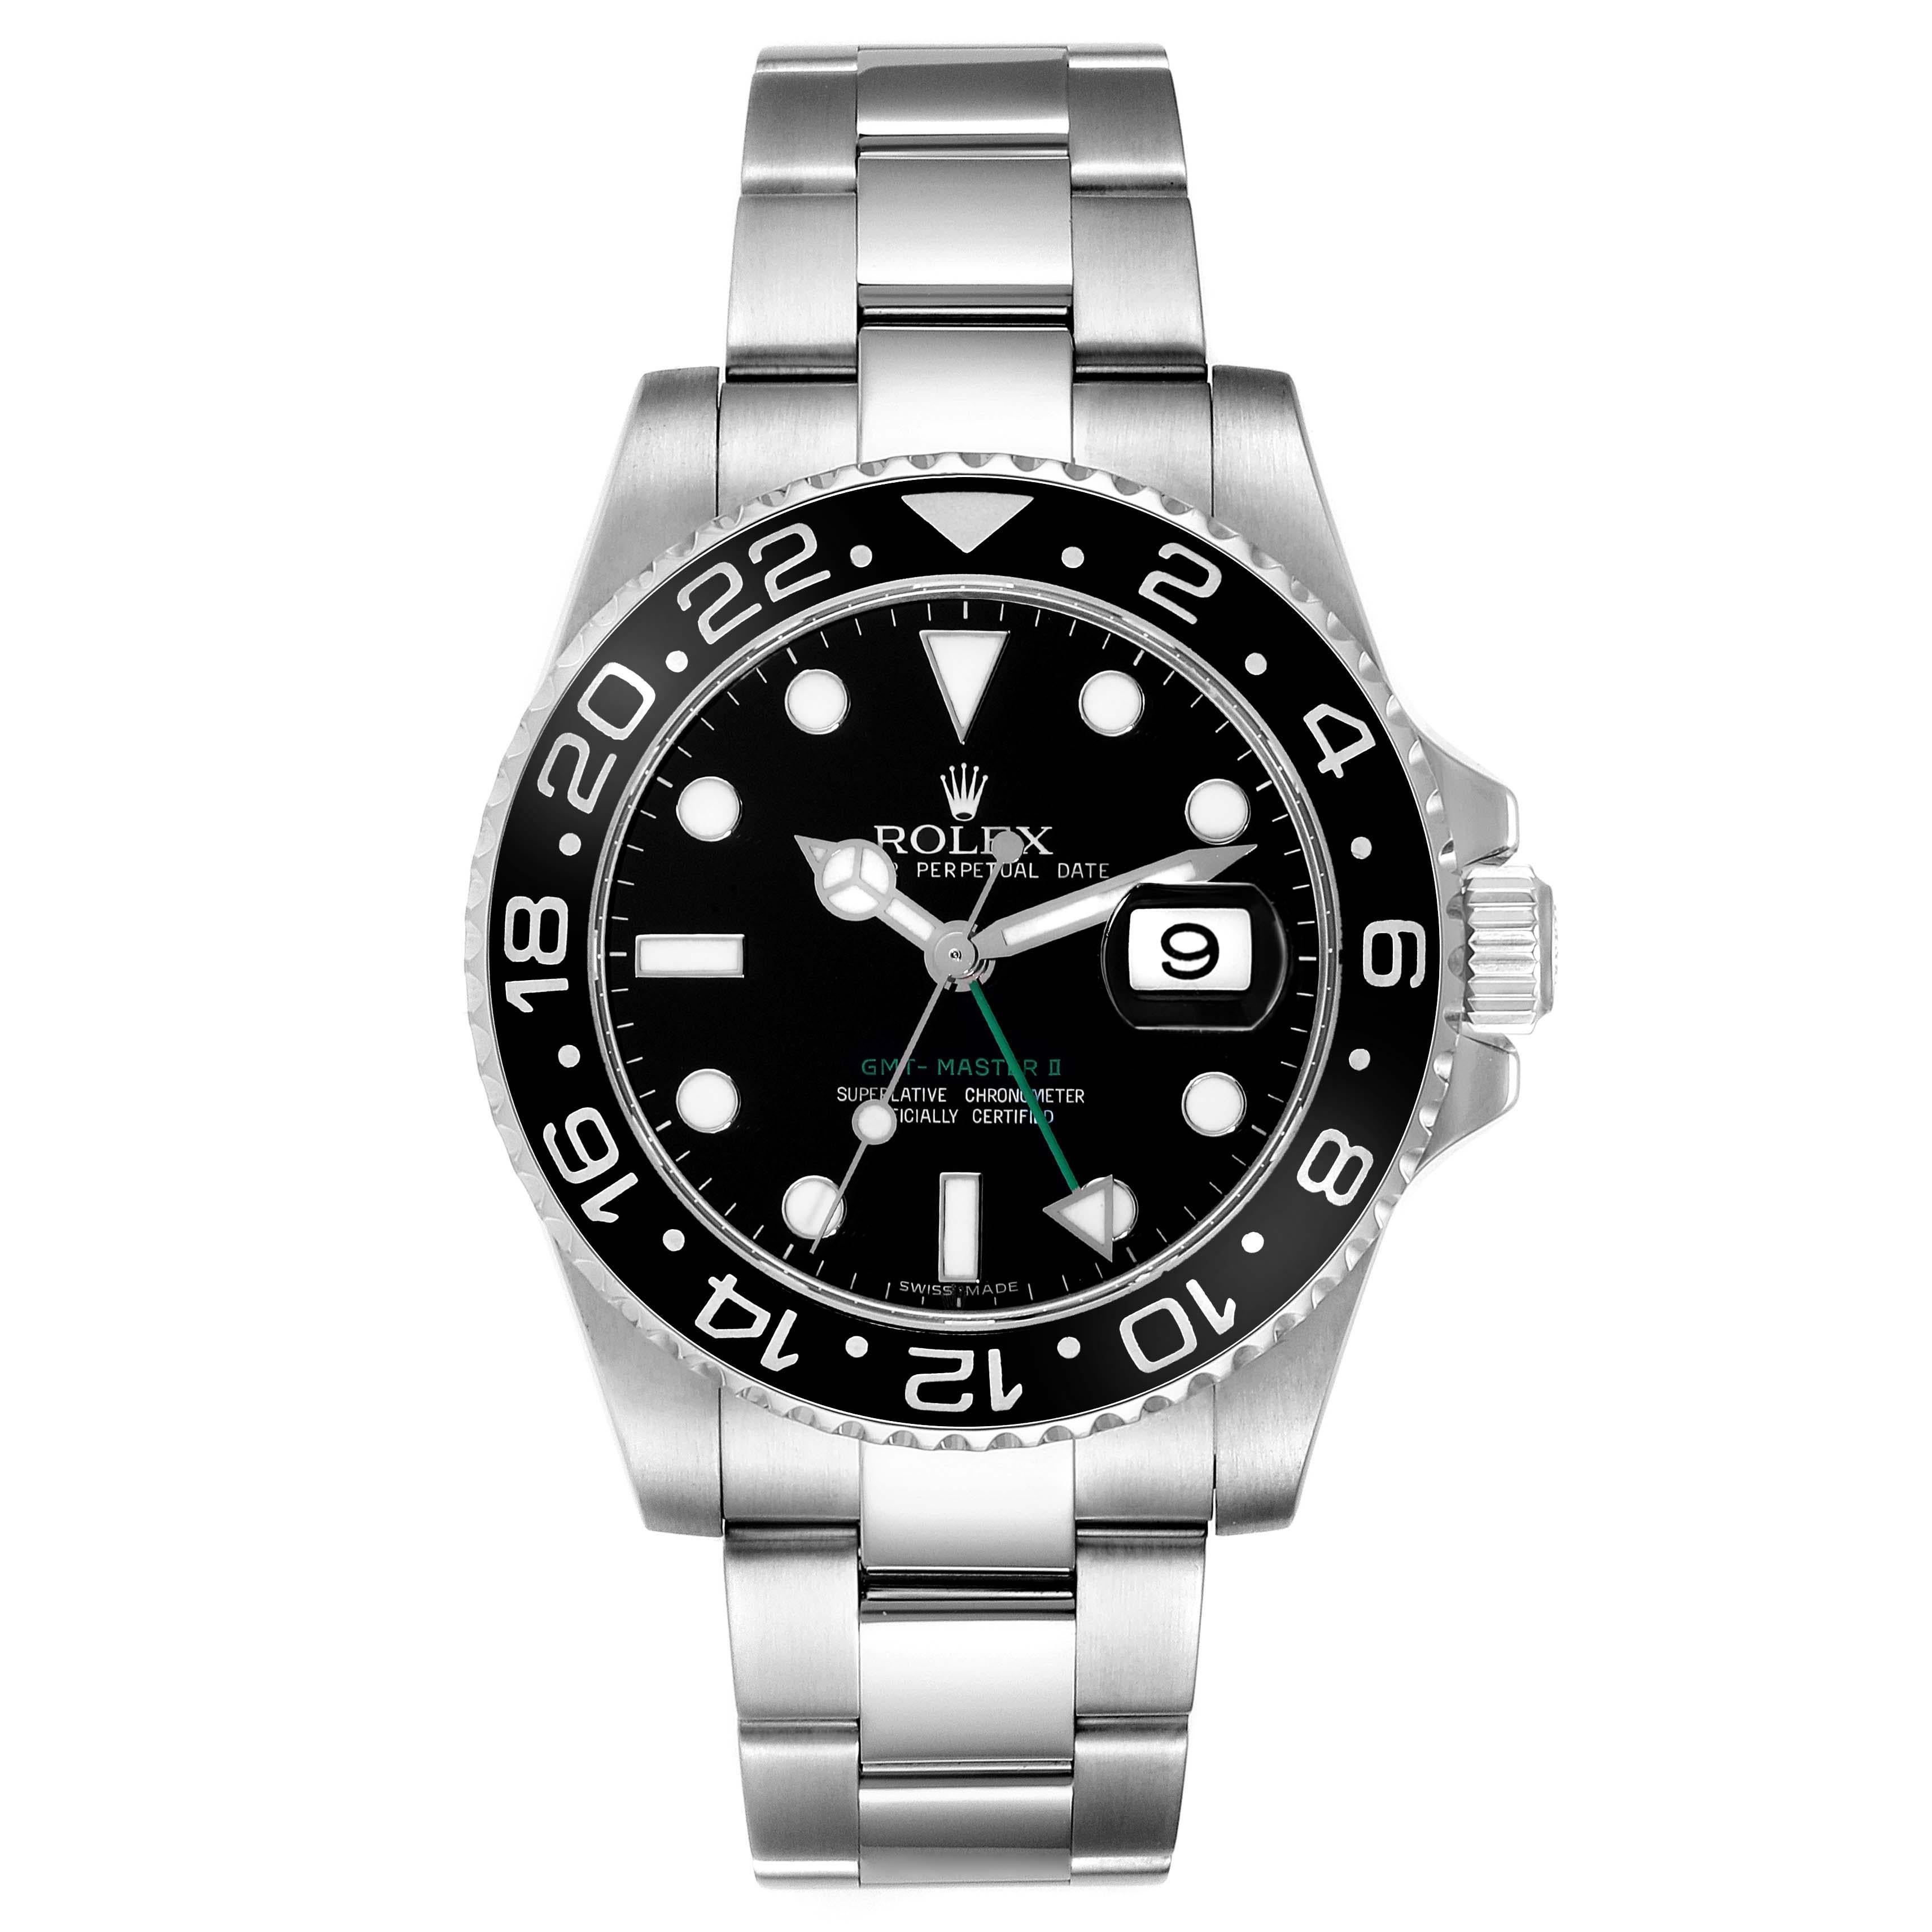 Rolex GMT Master II Black Dial Green Hand Steel Mens Watch 116710. Officially certified chronometer automatic self-winding movement. Stainless steel case 40.0 mm in diameter. Rolex logo on the crown. Stainless steel bidirectional rotating 24-hour